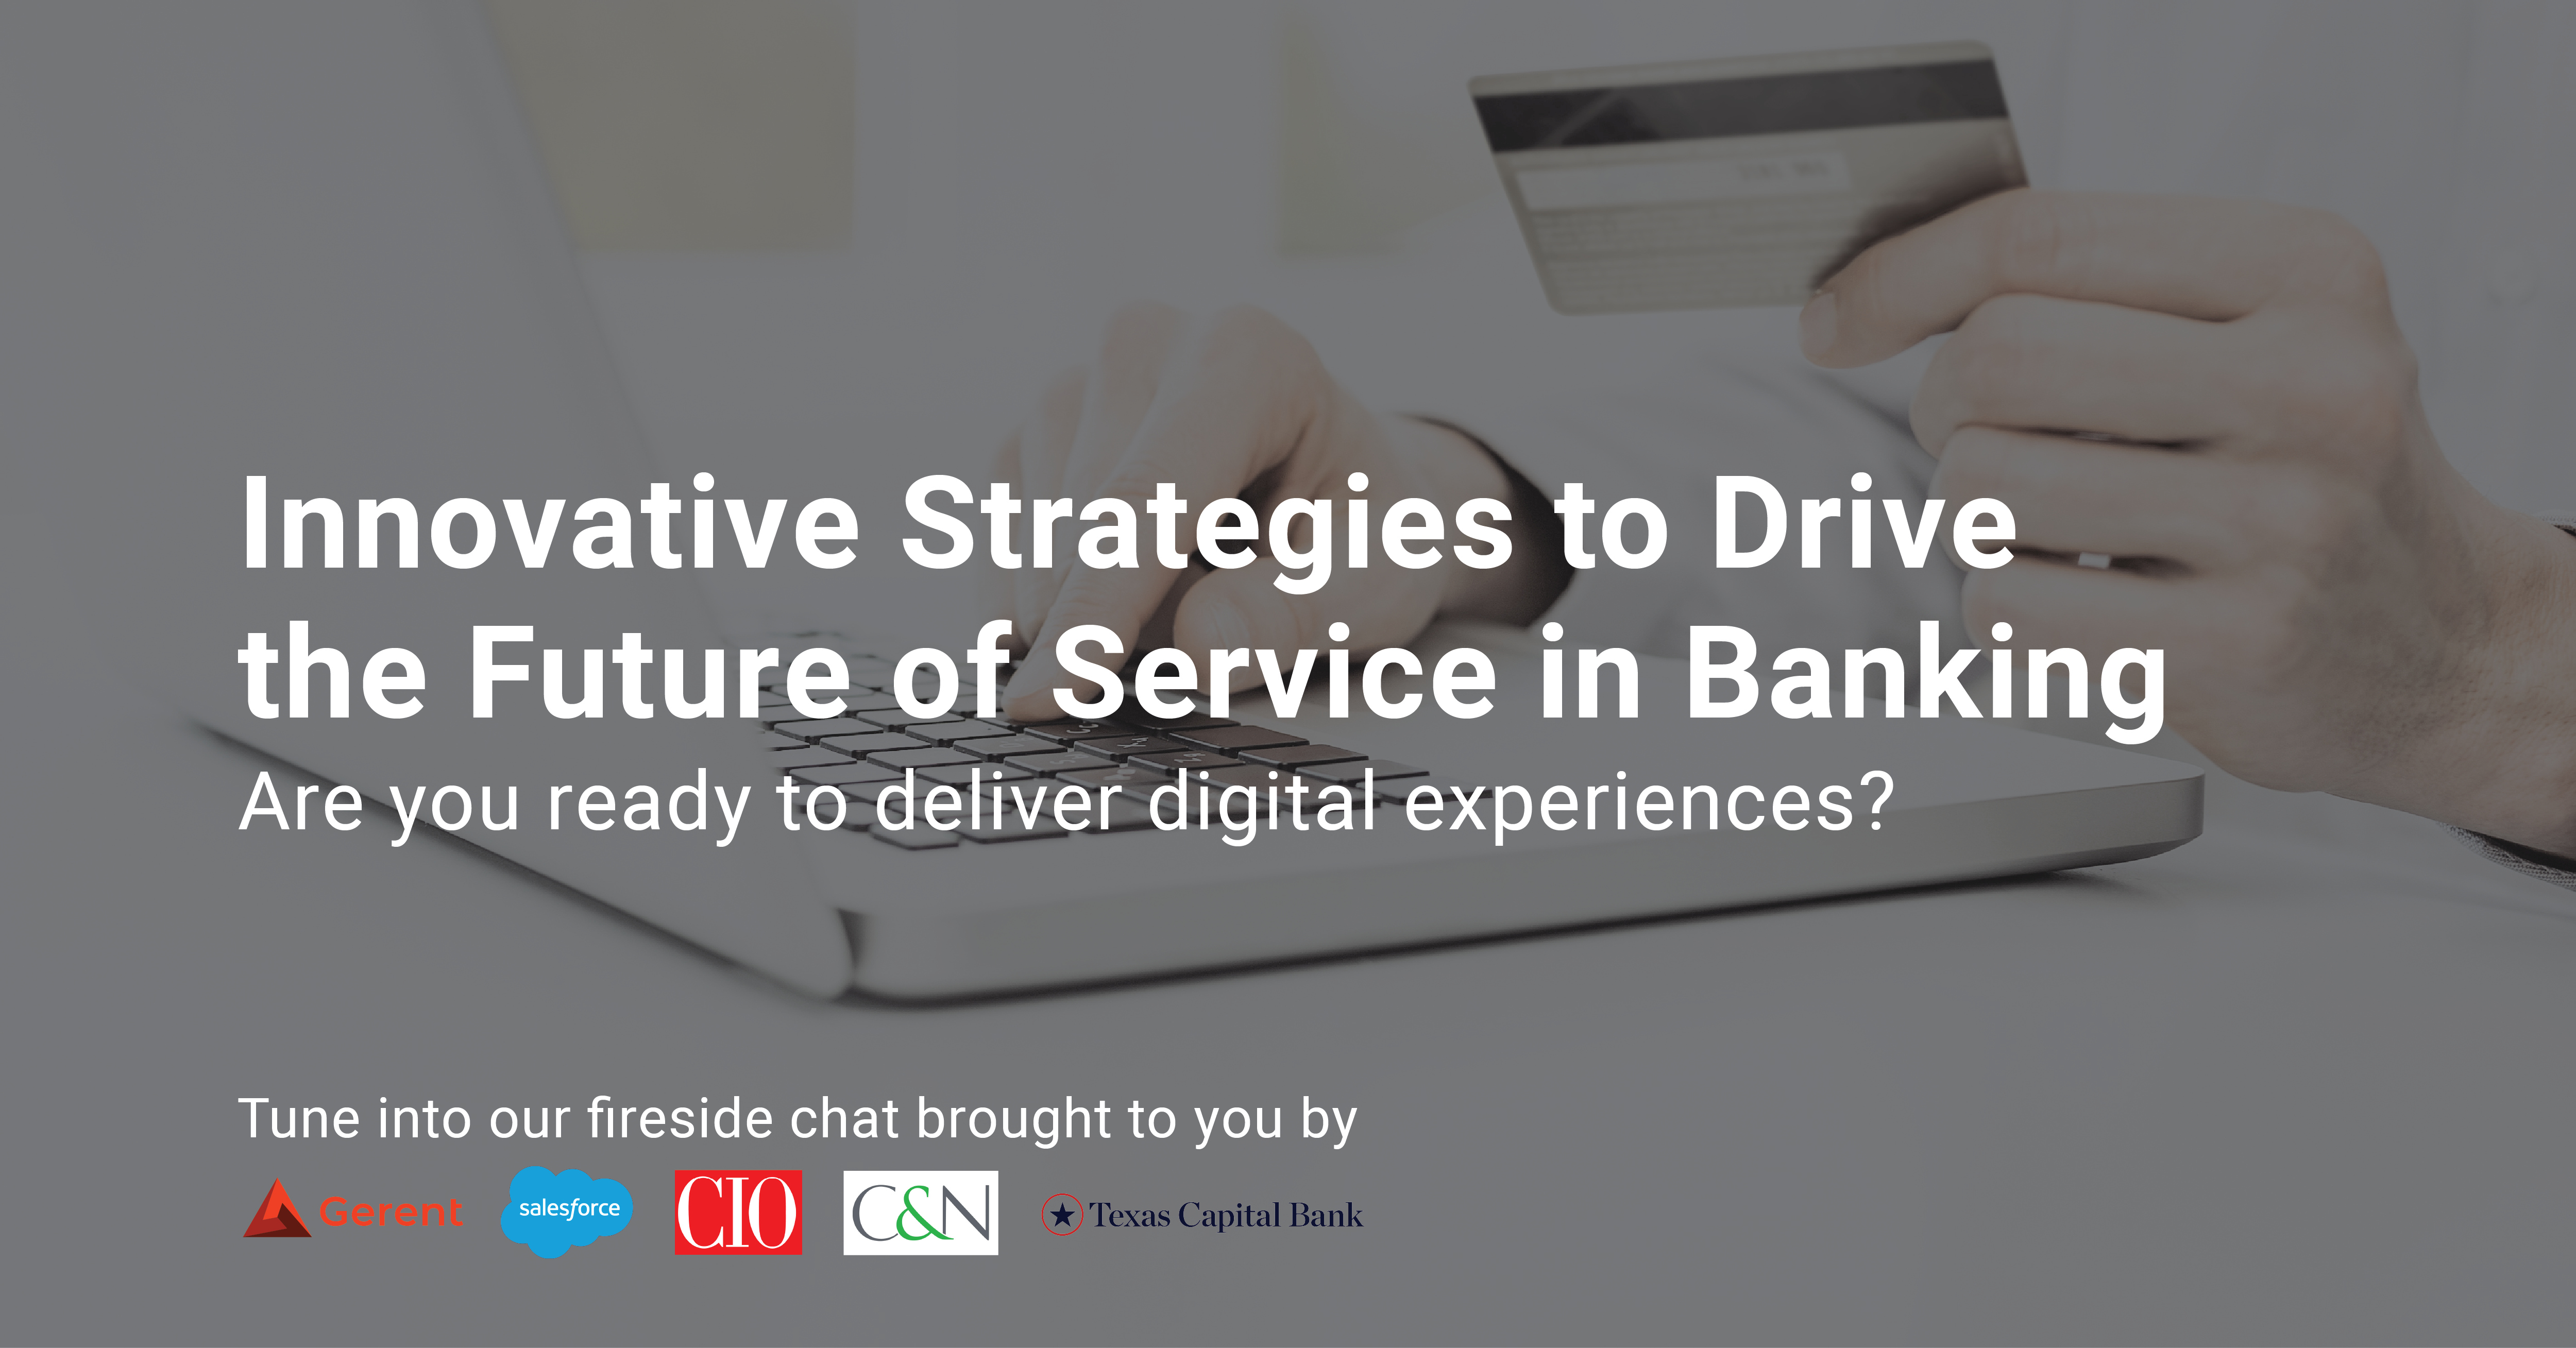 Innovative Strategies to Drive the Future of Service in Banking